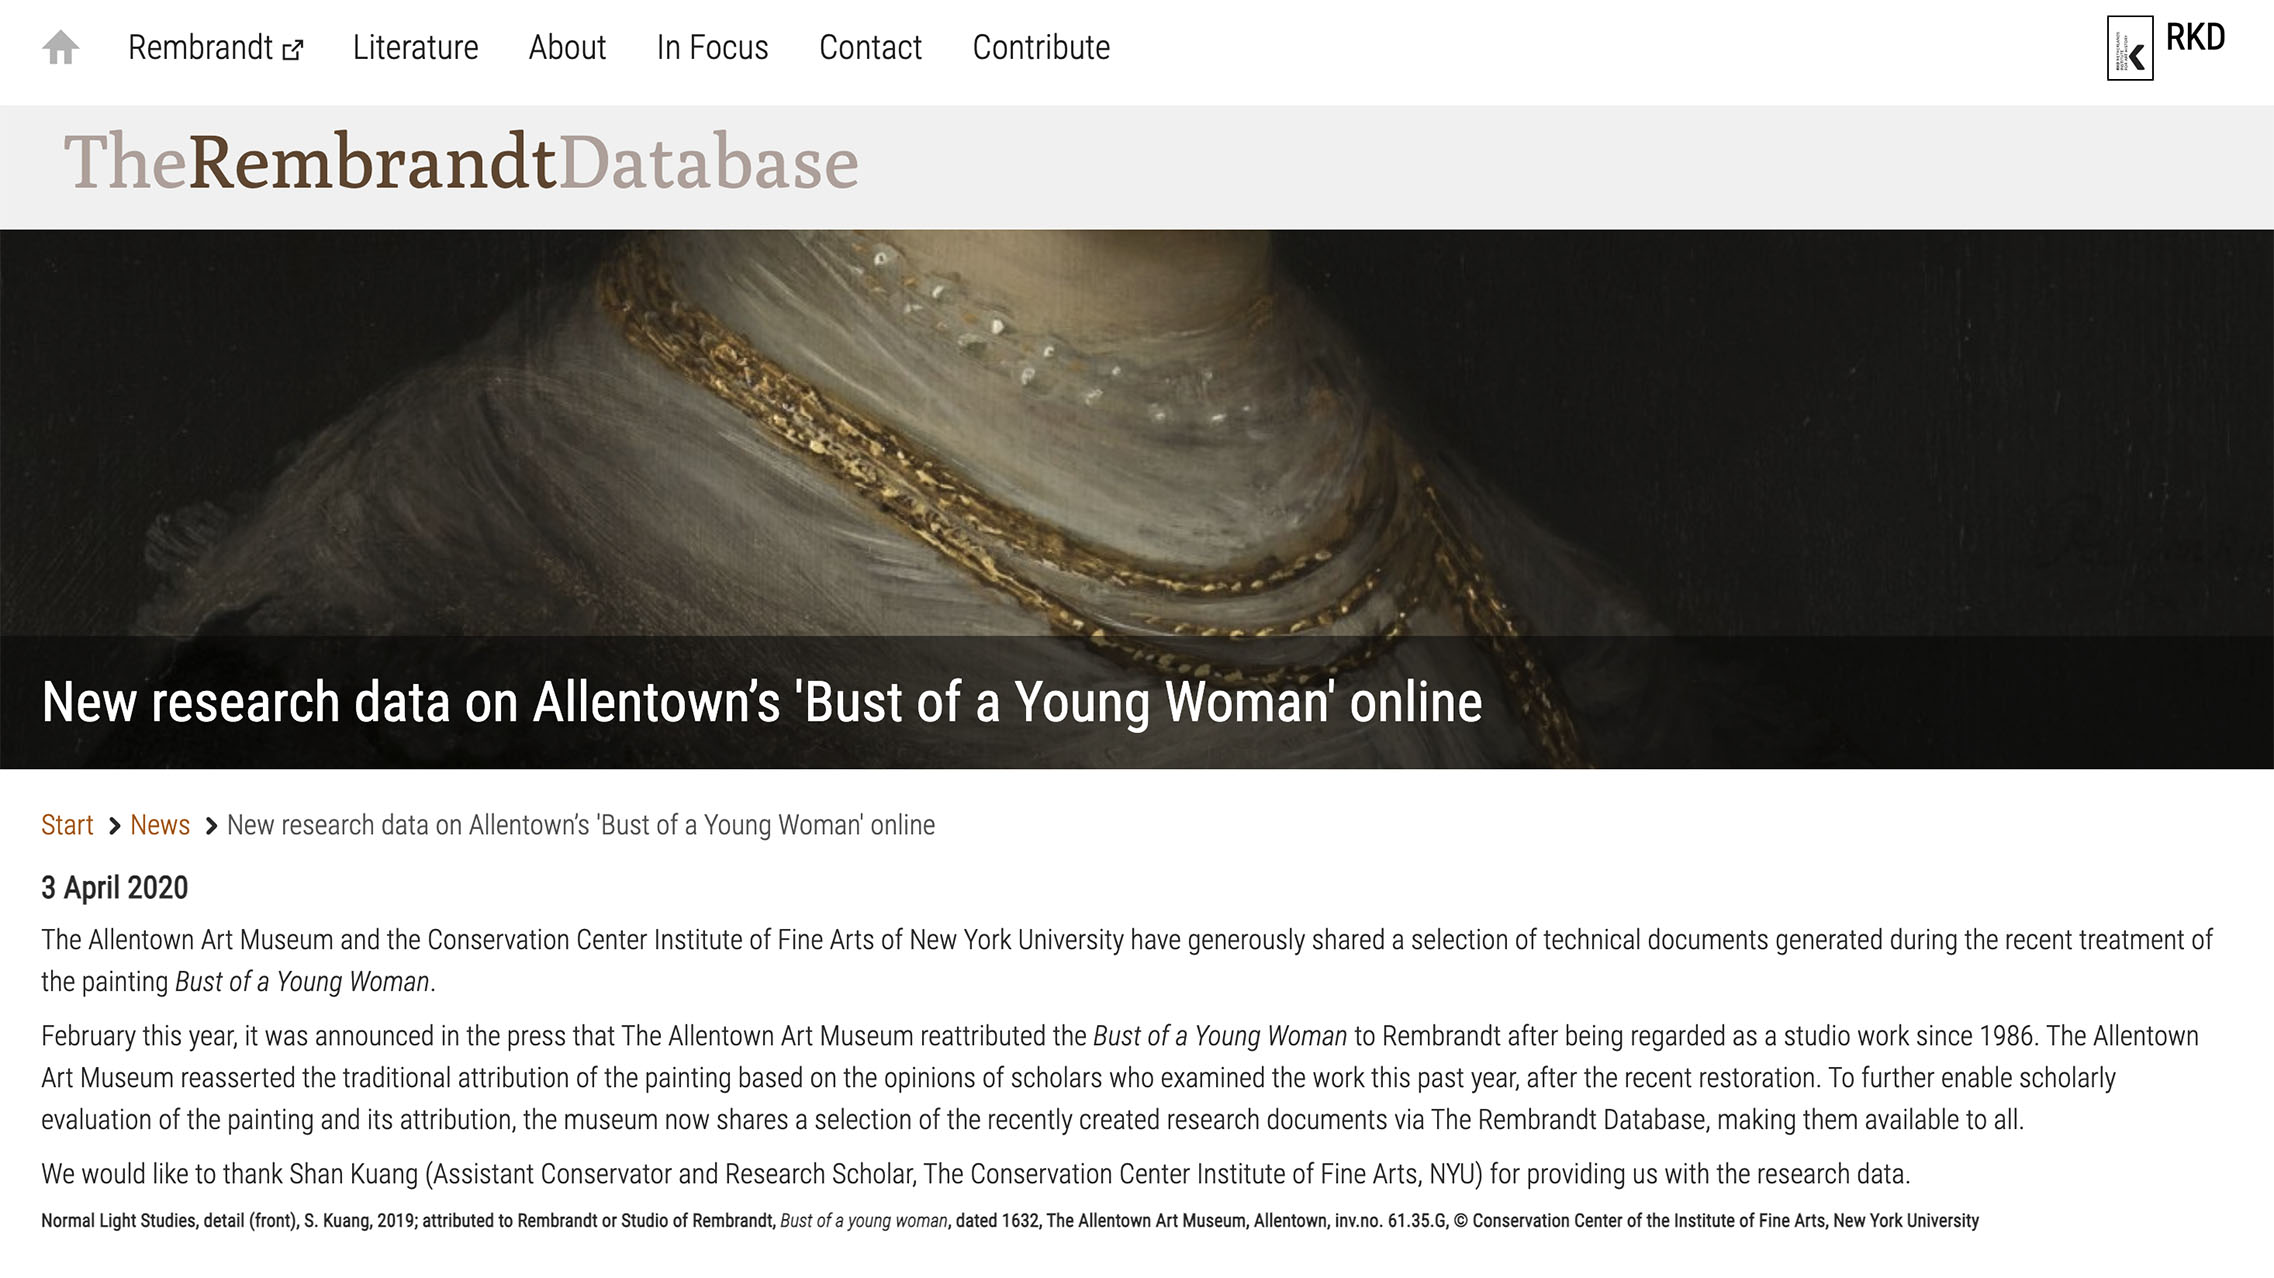 Screenshot of The Rembrandt Database, announcing new research data on Allentown's Rembrandt